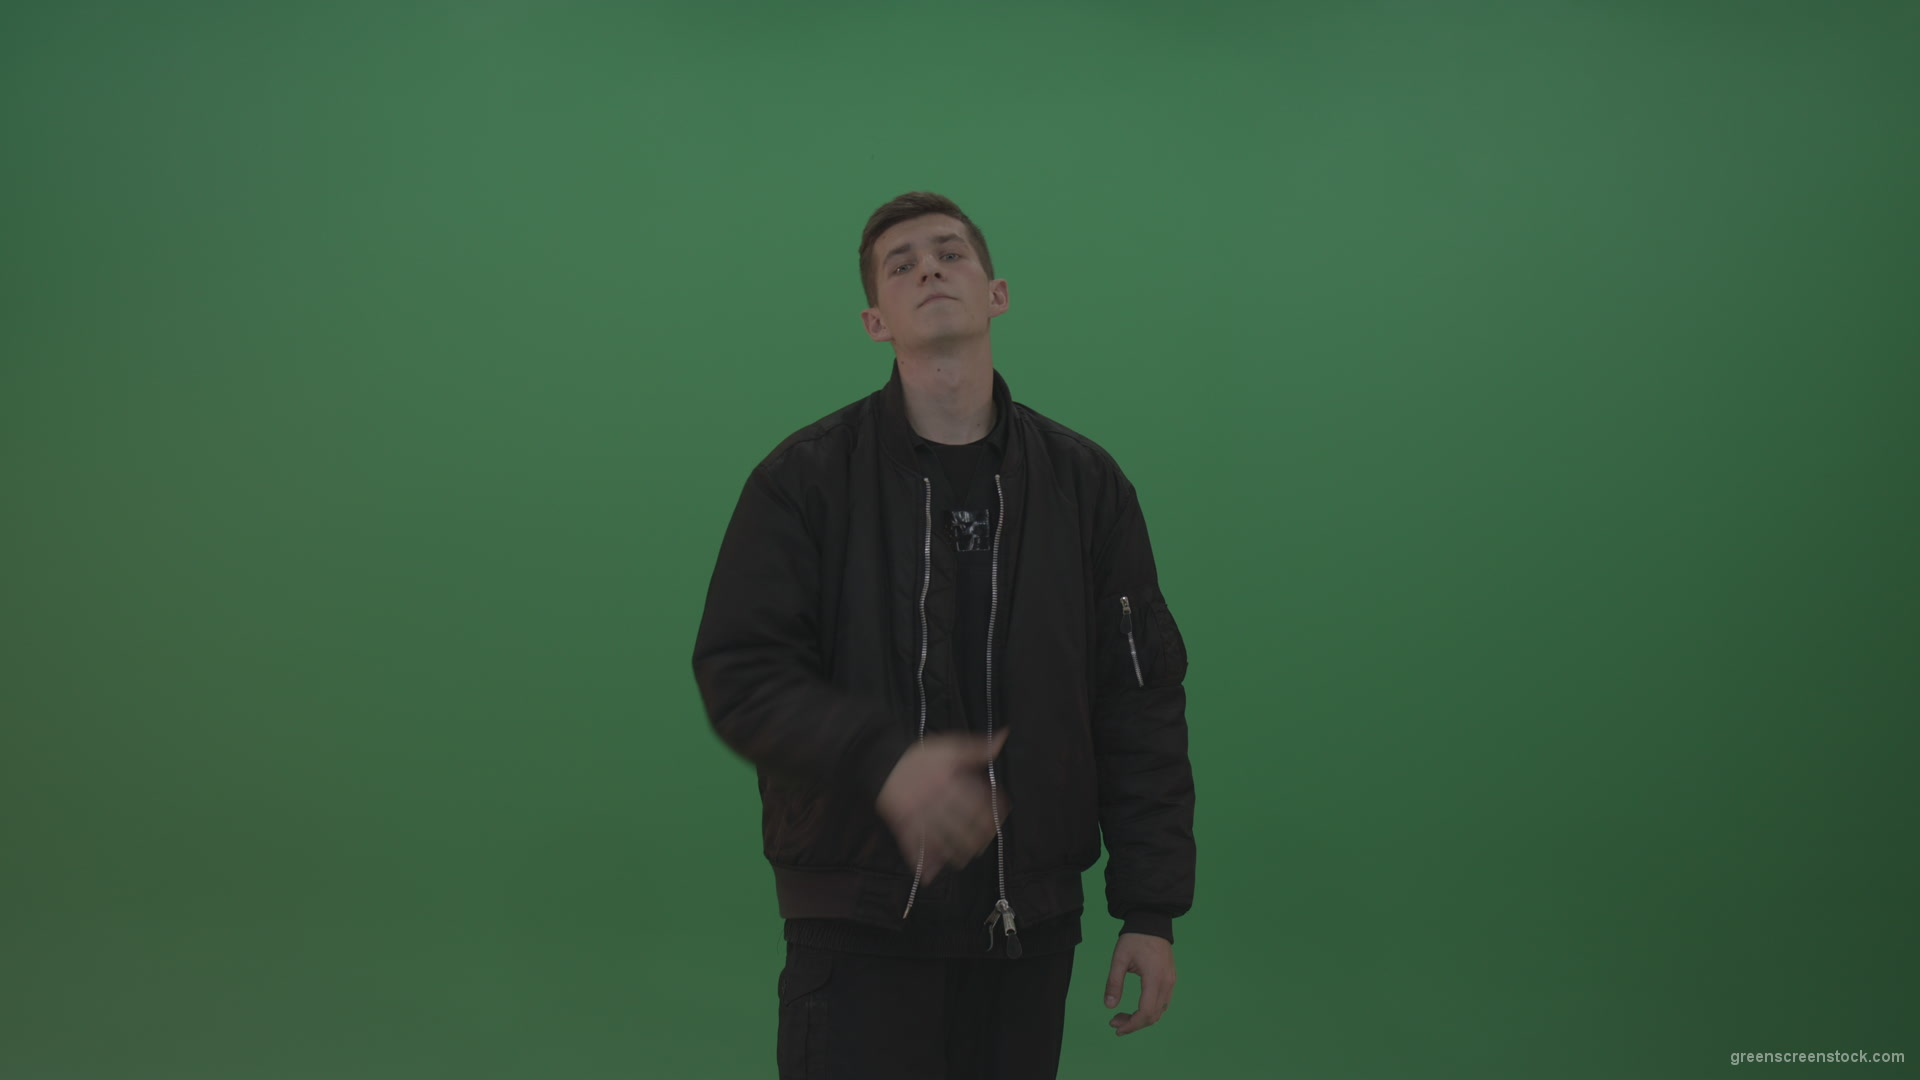 Boy-in-black-wear-displays-the-kill-sign-and-two-middle-fingers-in-the-air-over-chromakey-background_002 Green Screen Stock